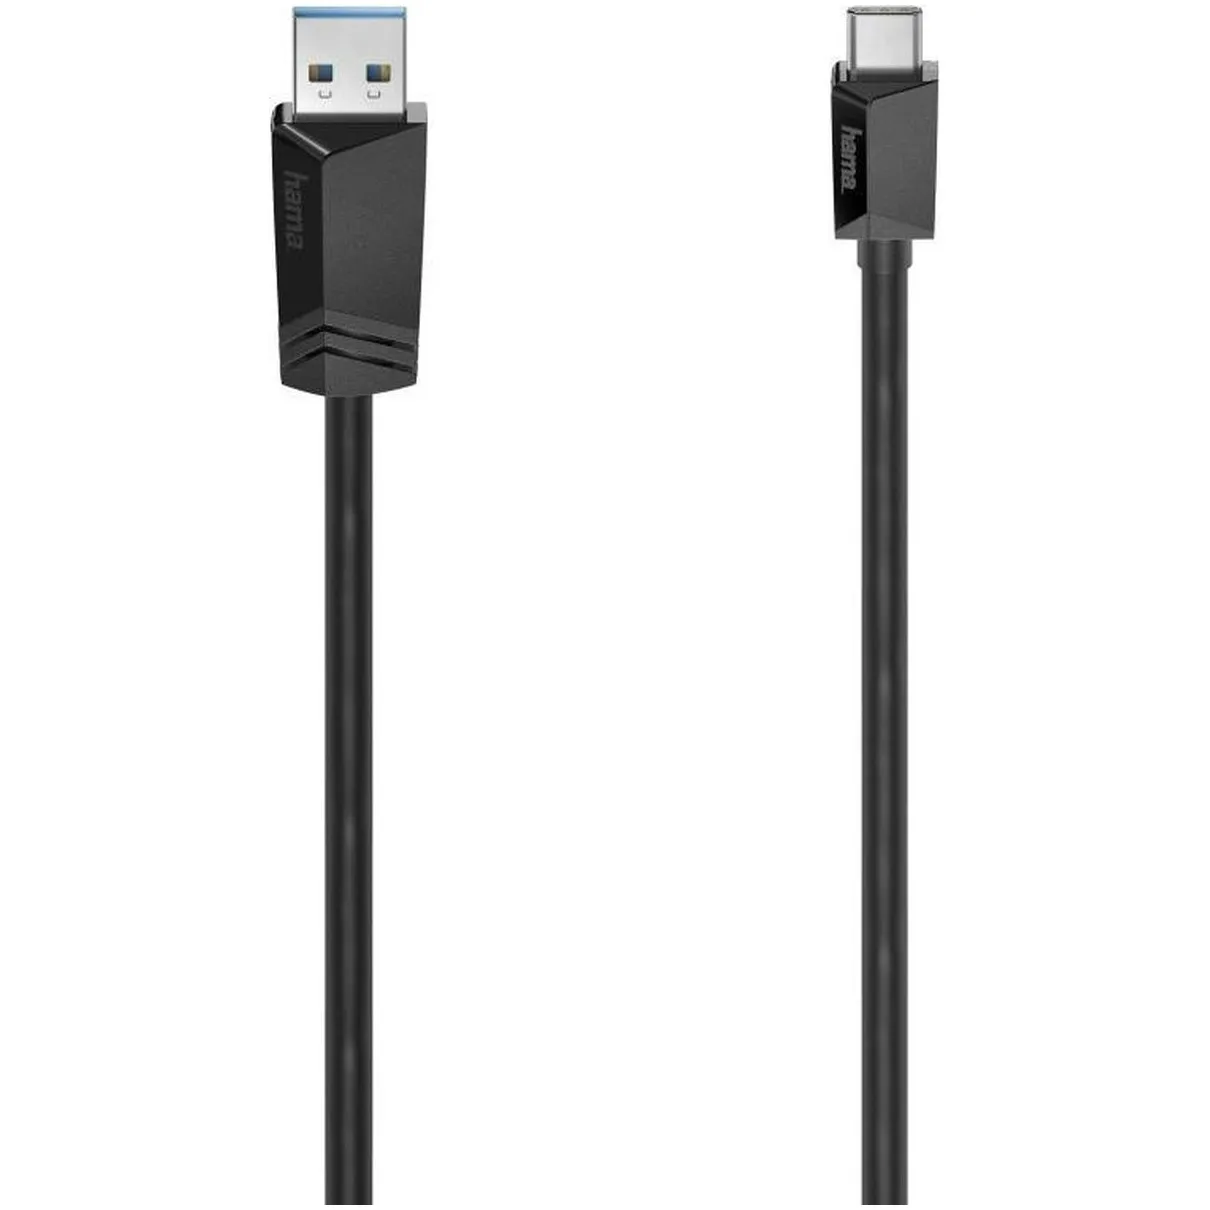 Hama USB Type-C to USB 3.2 Type-A Cable 1.50M